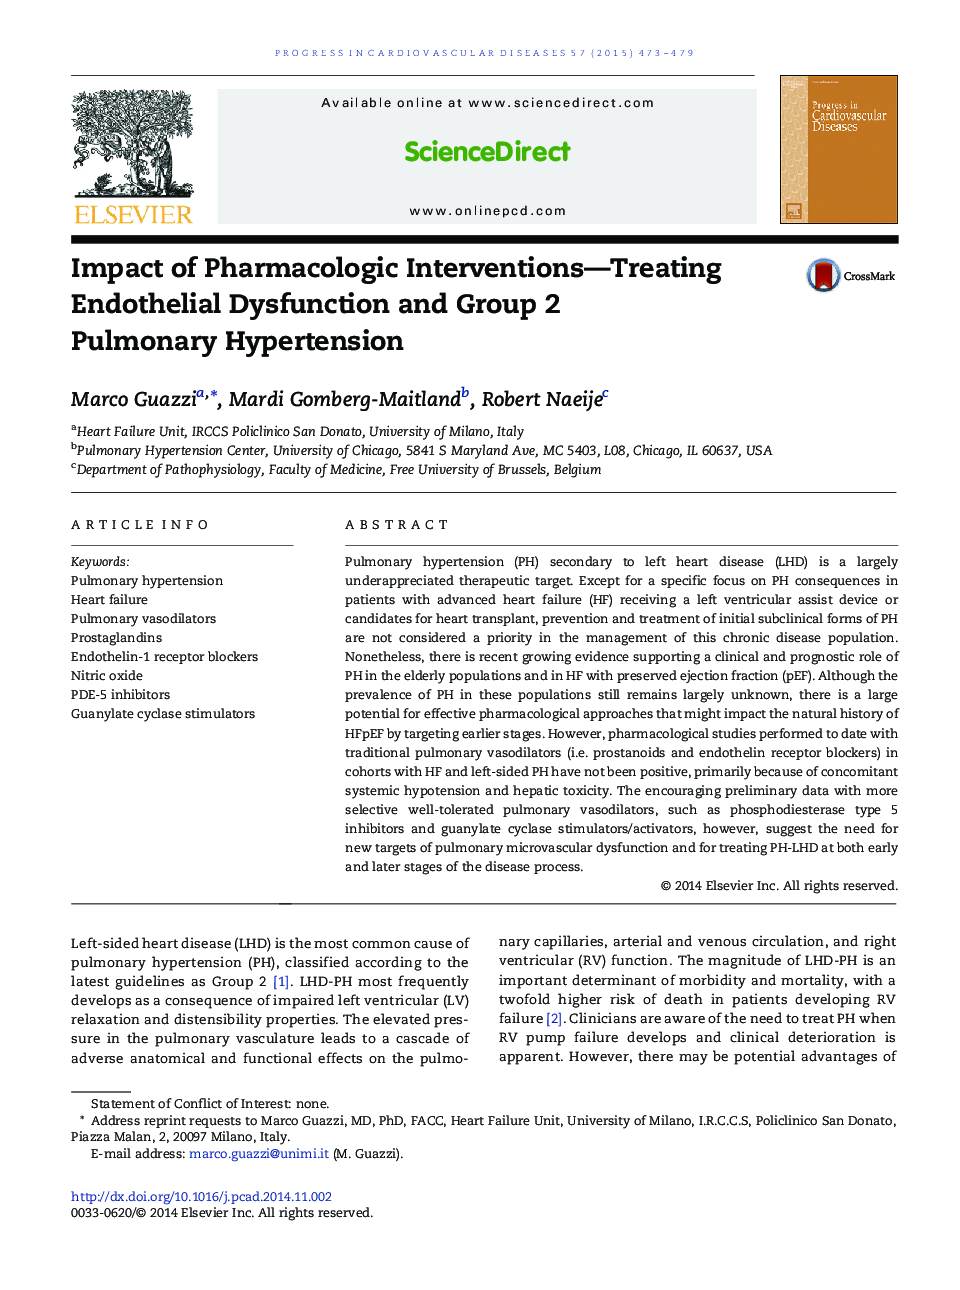 Impact of Pharmacologic Interventions—Treating Endothelial Dysfunction and Group 2 Pulmonary Hypertension 